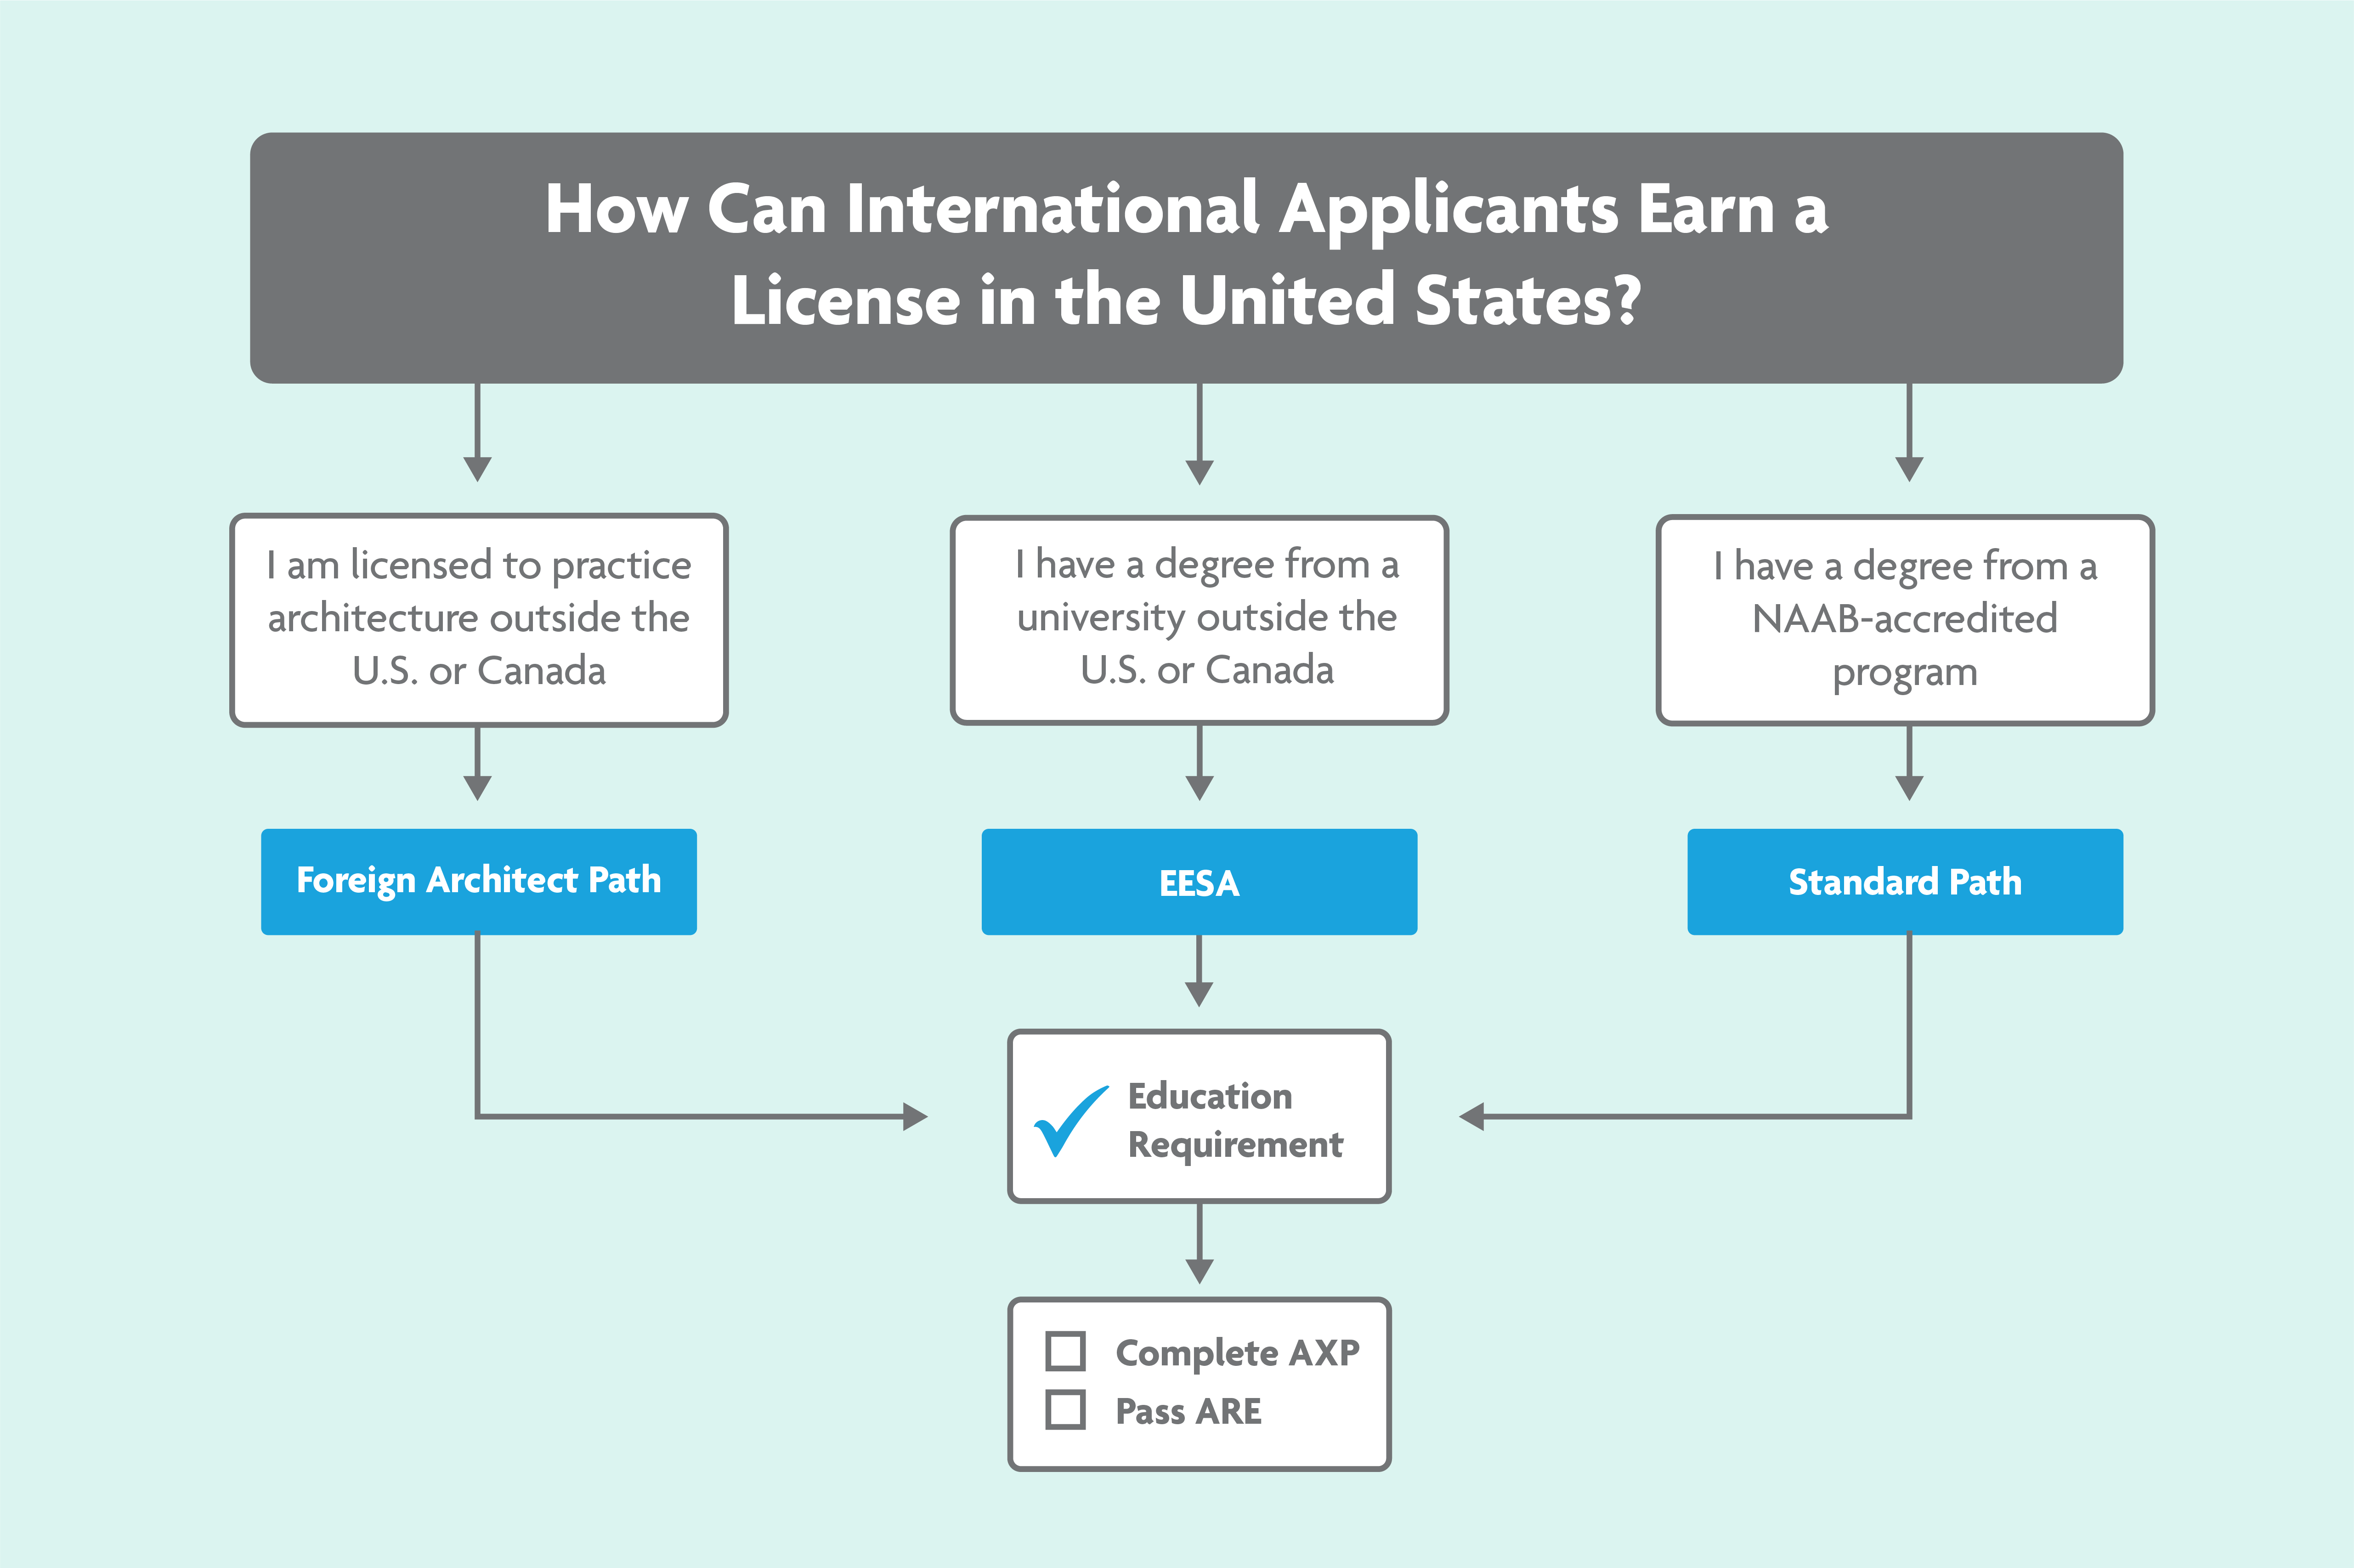 Flow chart showing how international candidates can earn an architecture license in the United States.